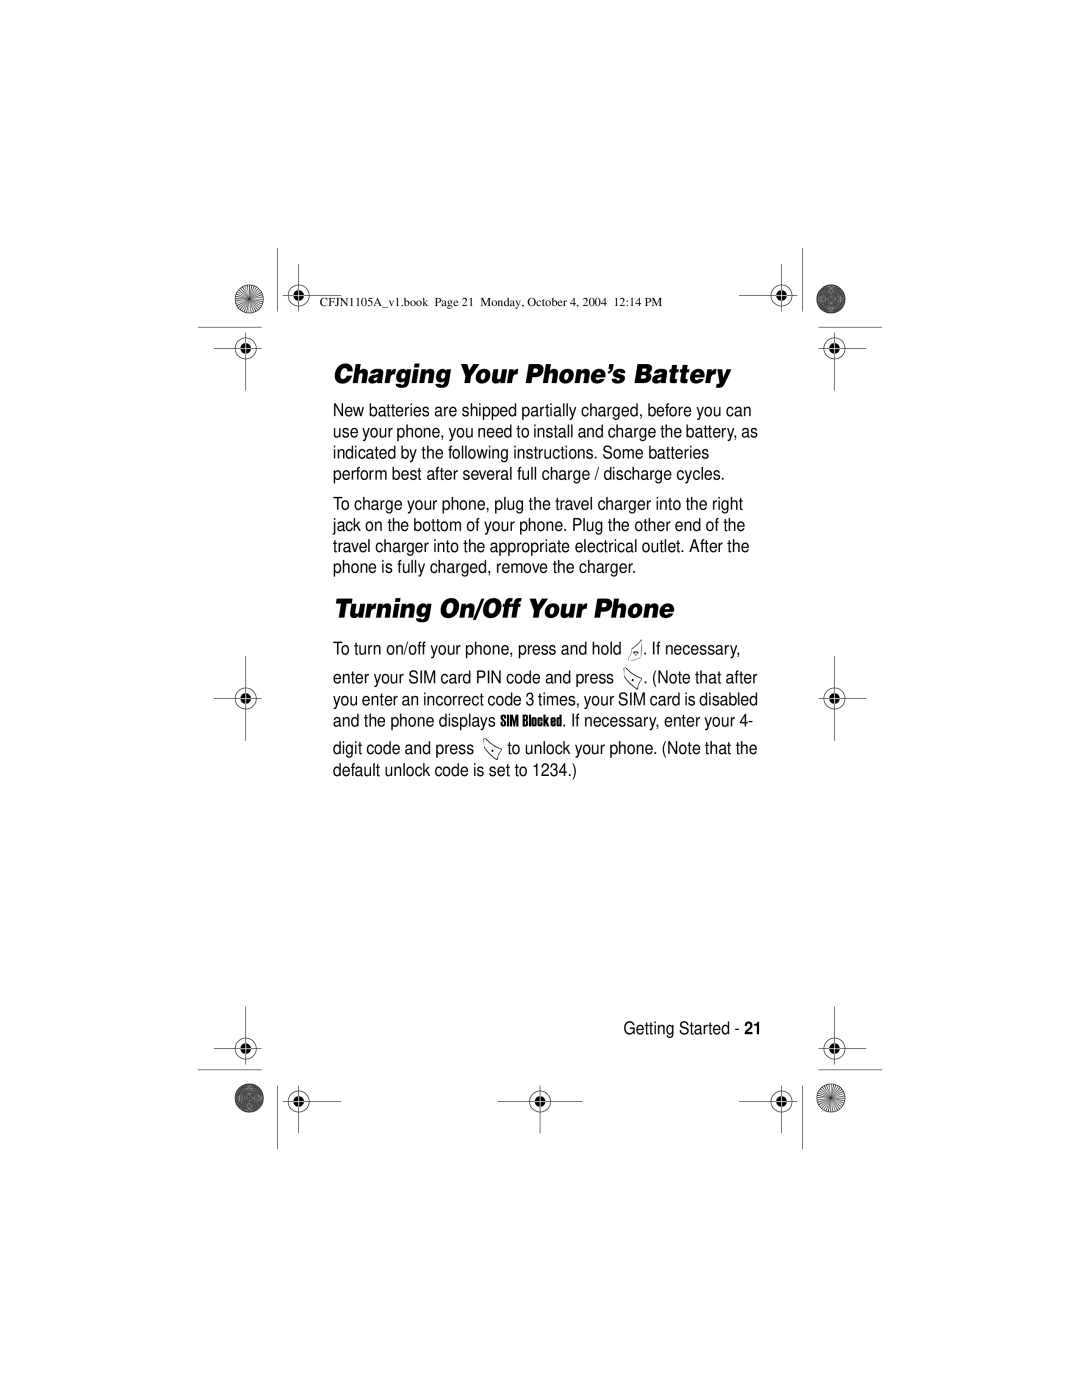 Motorola C155, C156 manual Charging Your Phone’s Battery, Turning On/Off Your Phone 